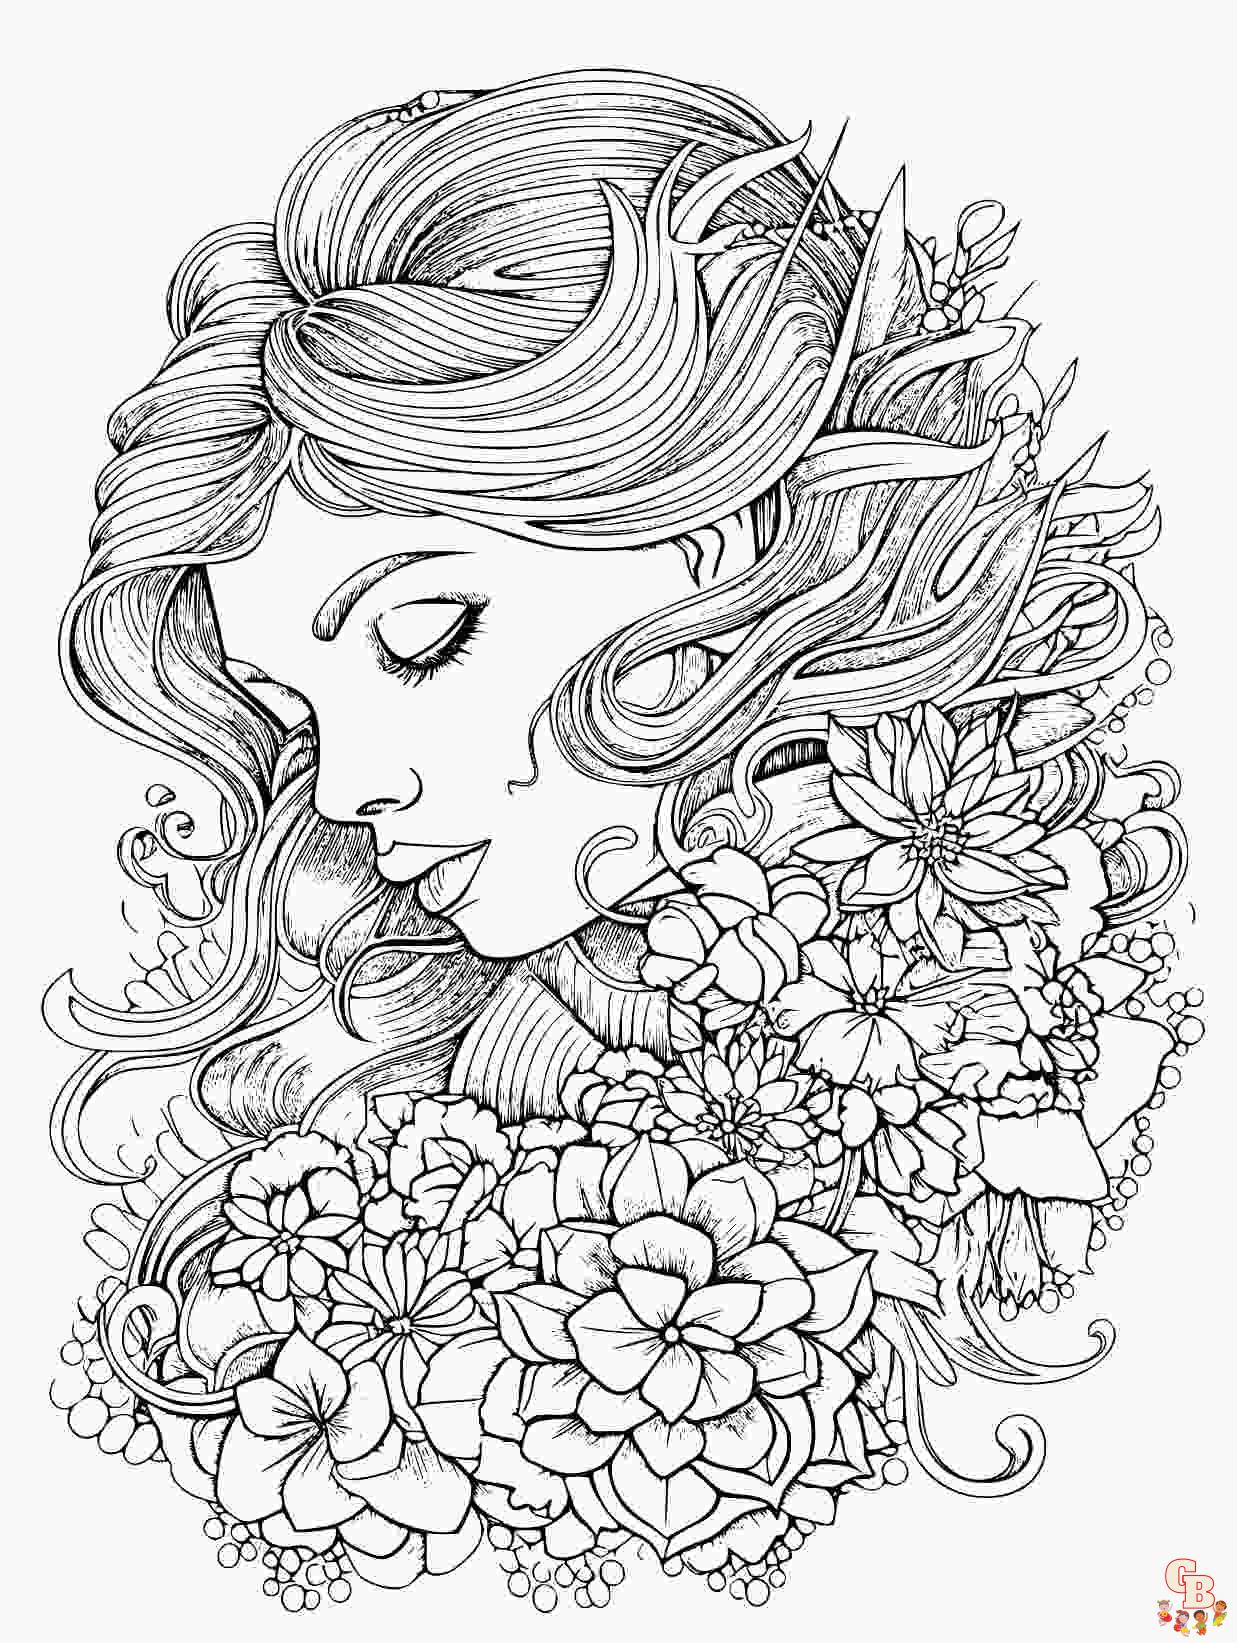 Stress coloring pages to print